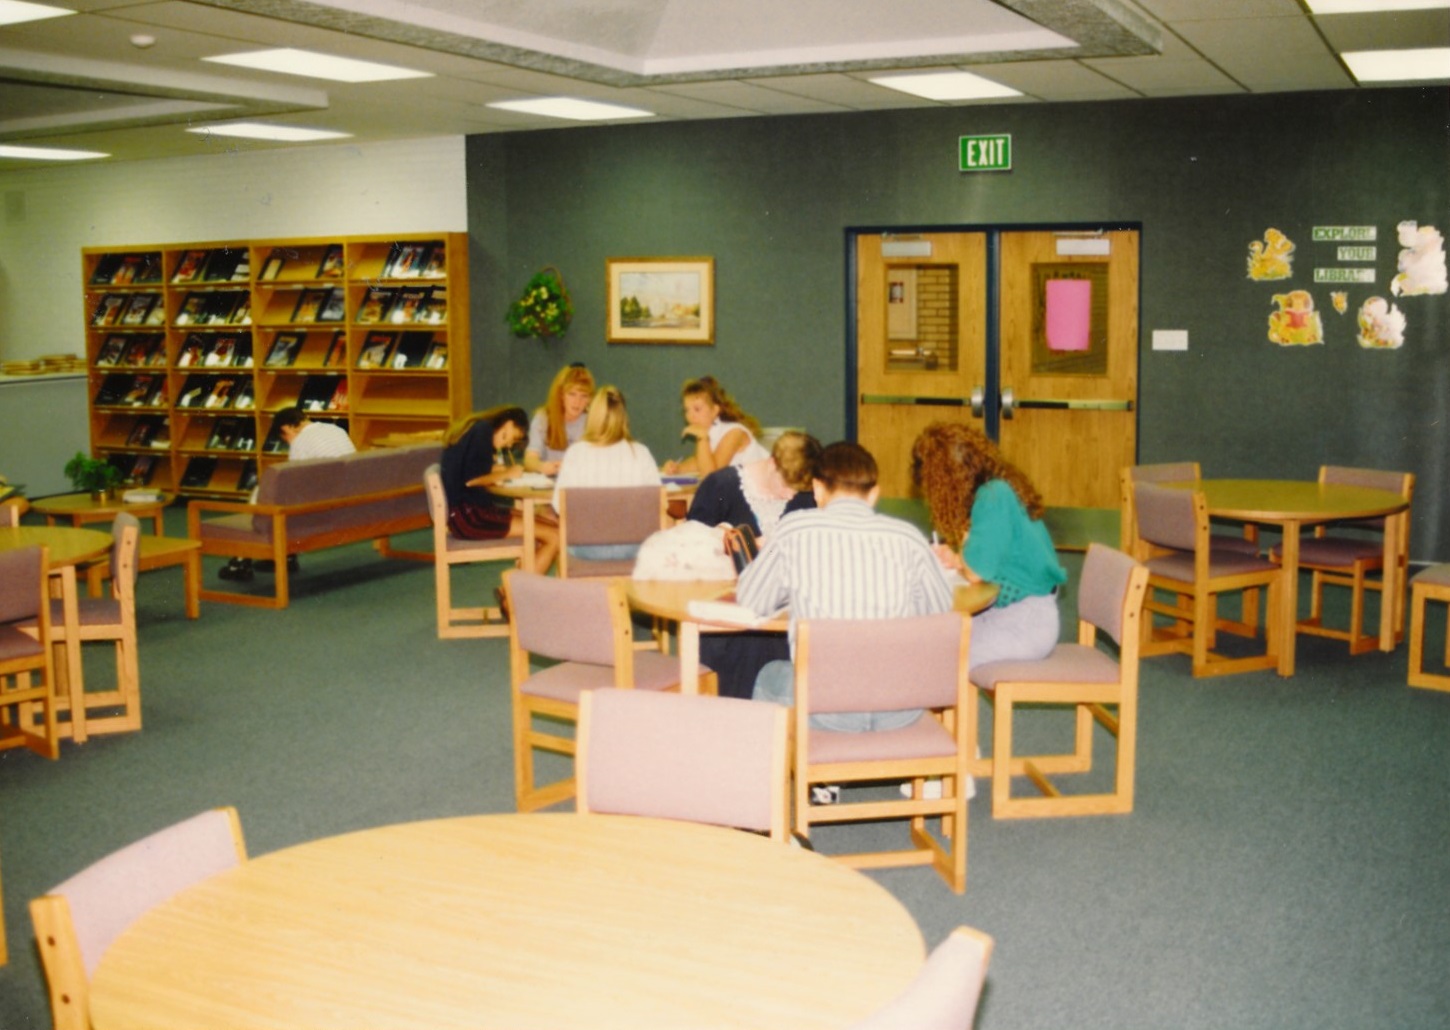 The library at Dixie High School